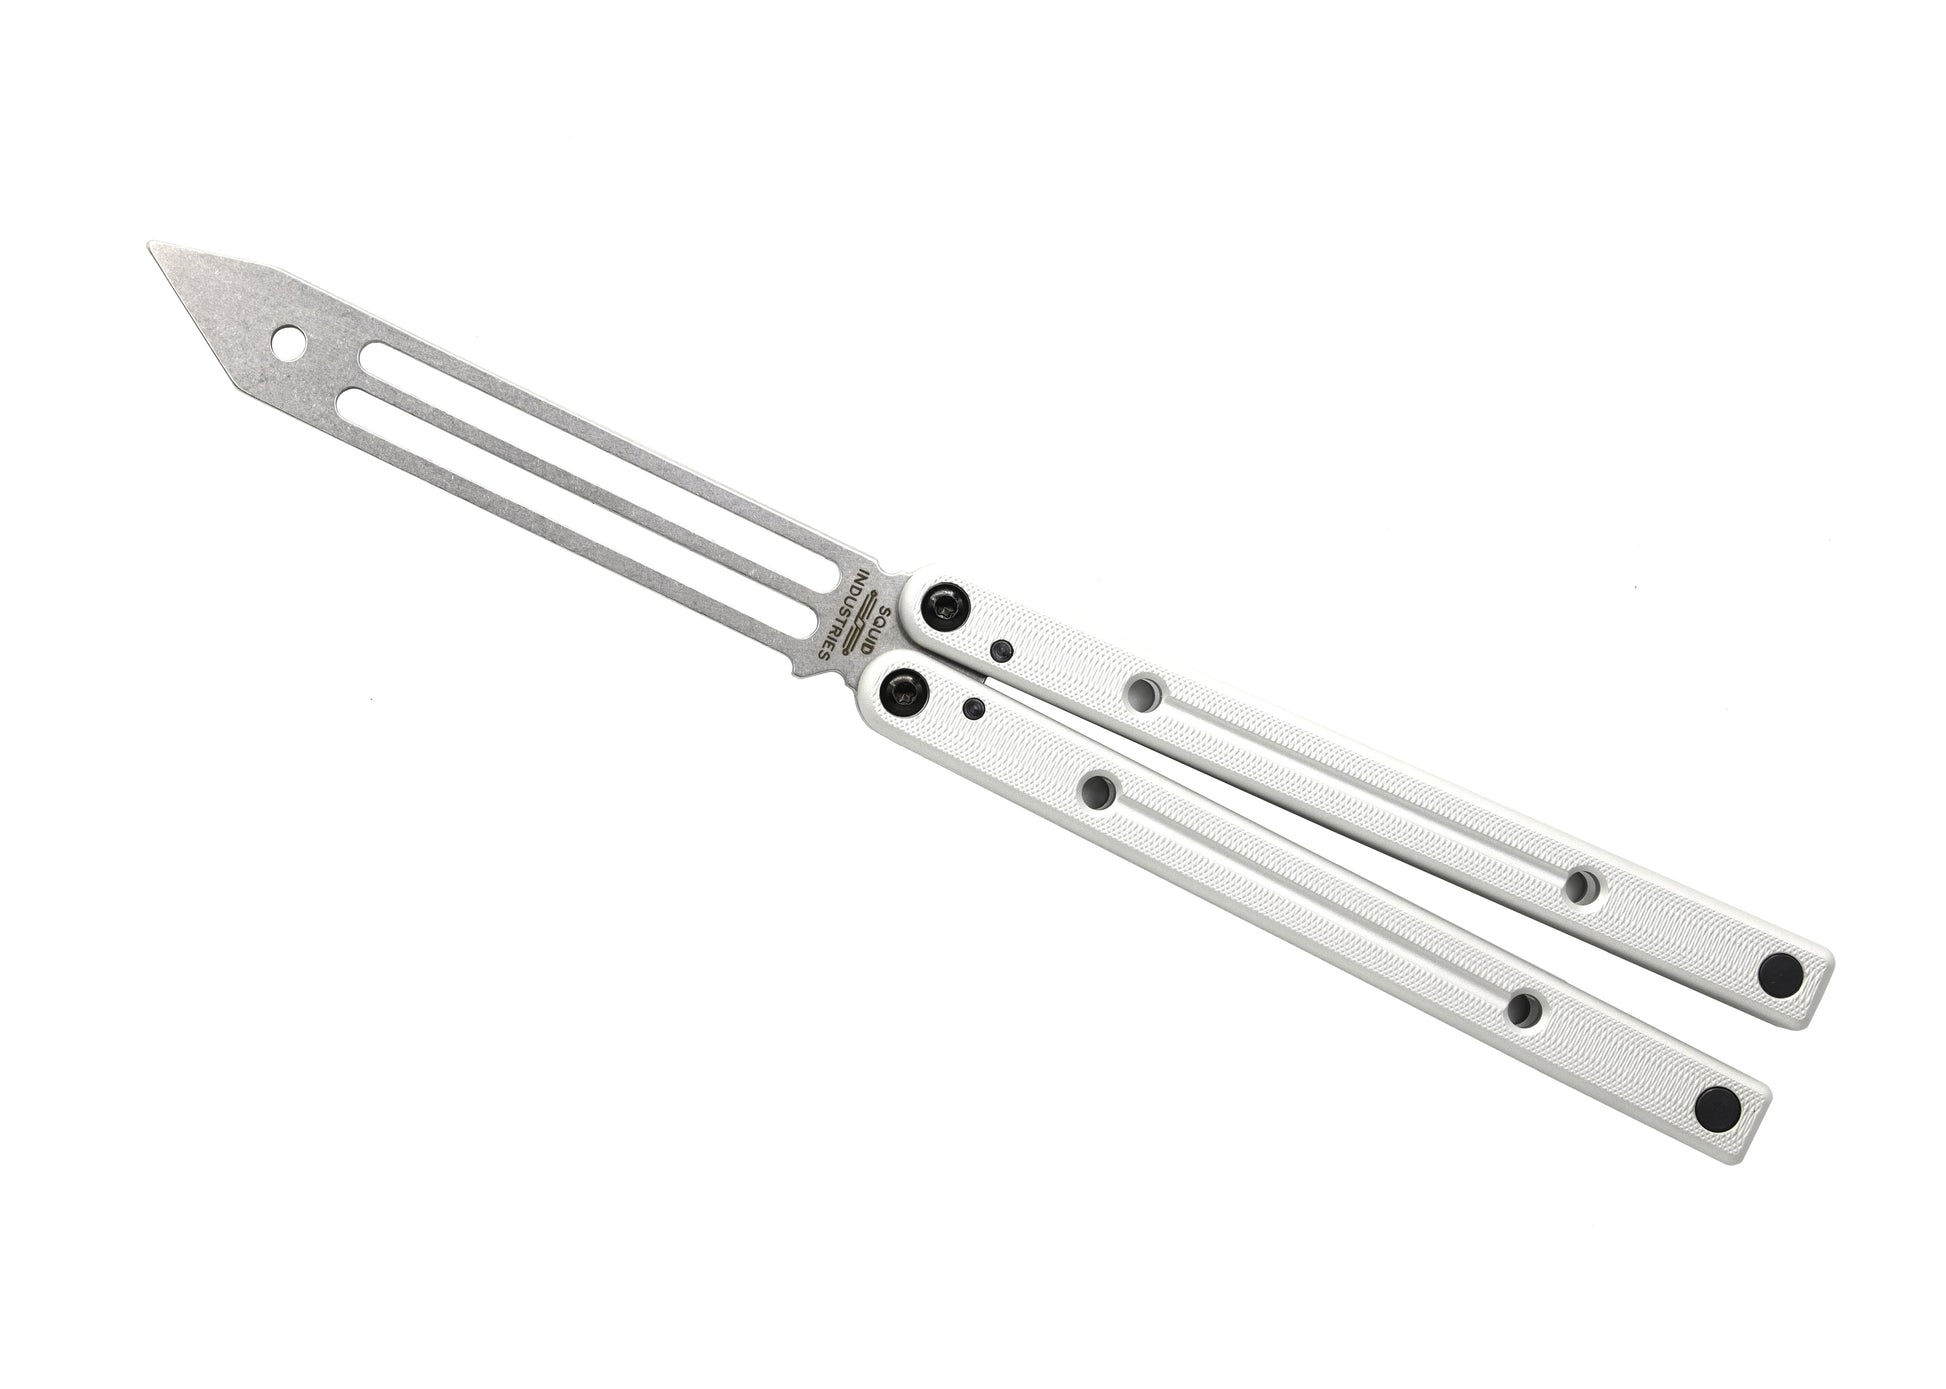 Silver Clearance Blemished Squidtrainer V4 Balisong Butterfly Knife Trainer 